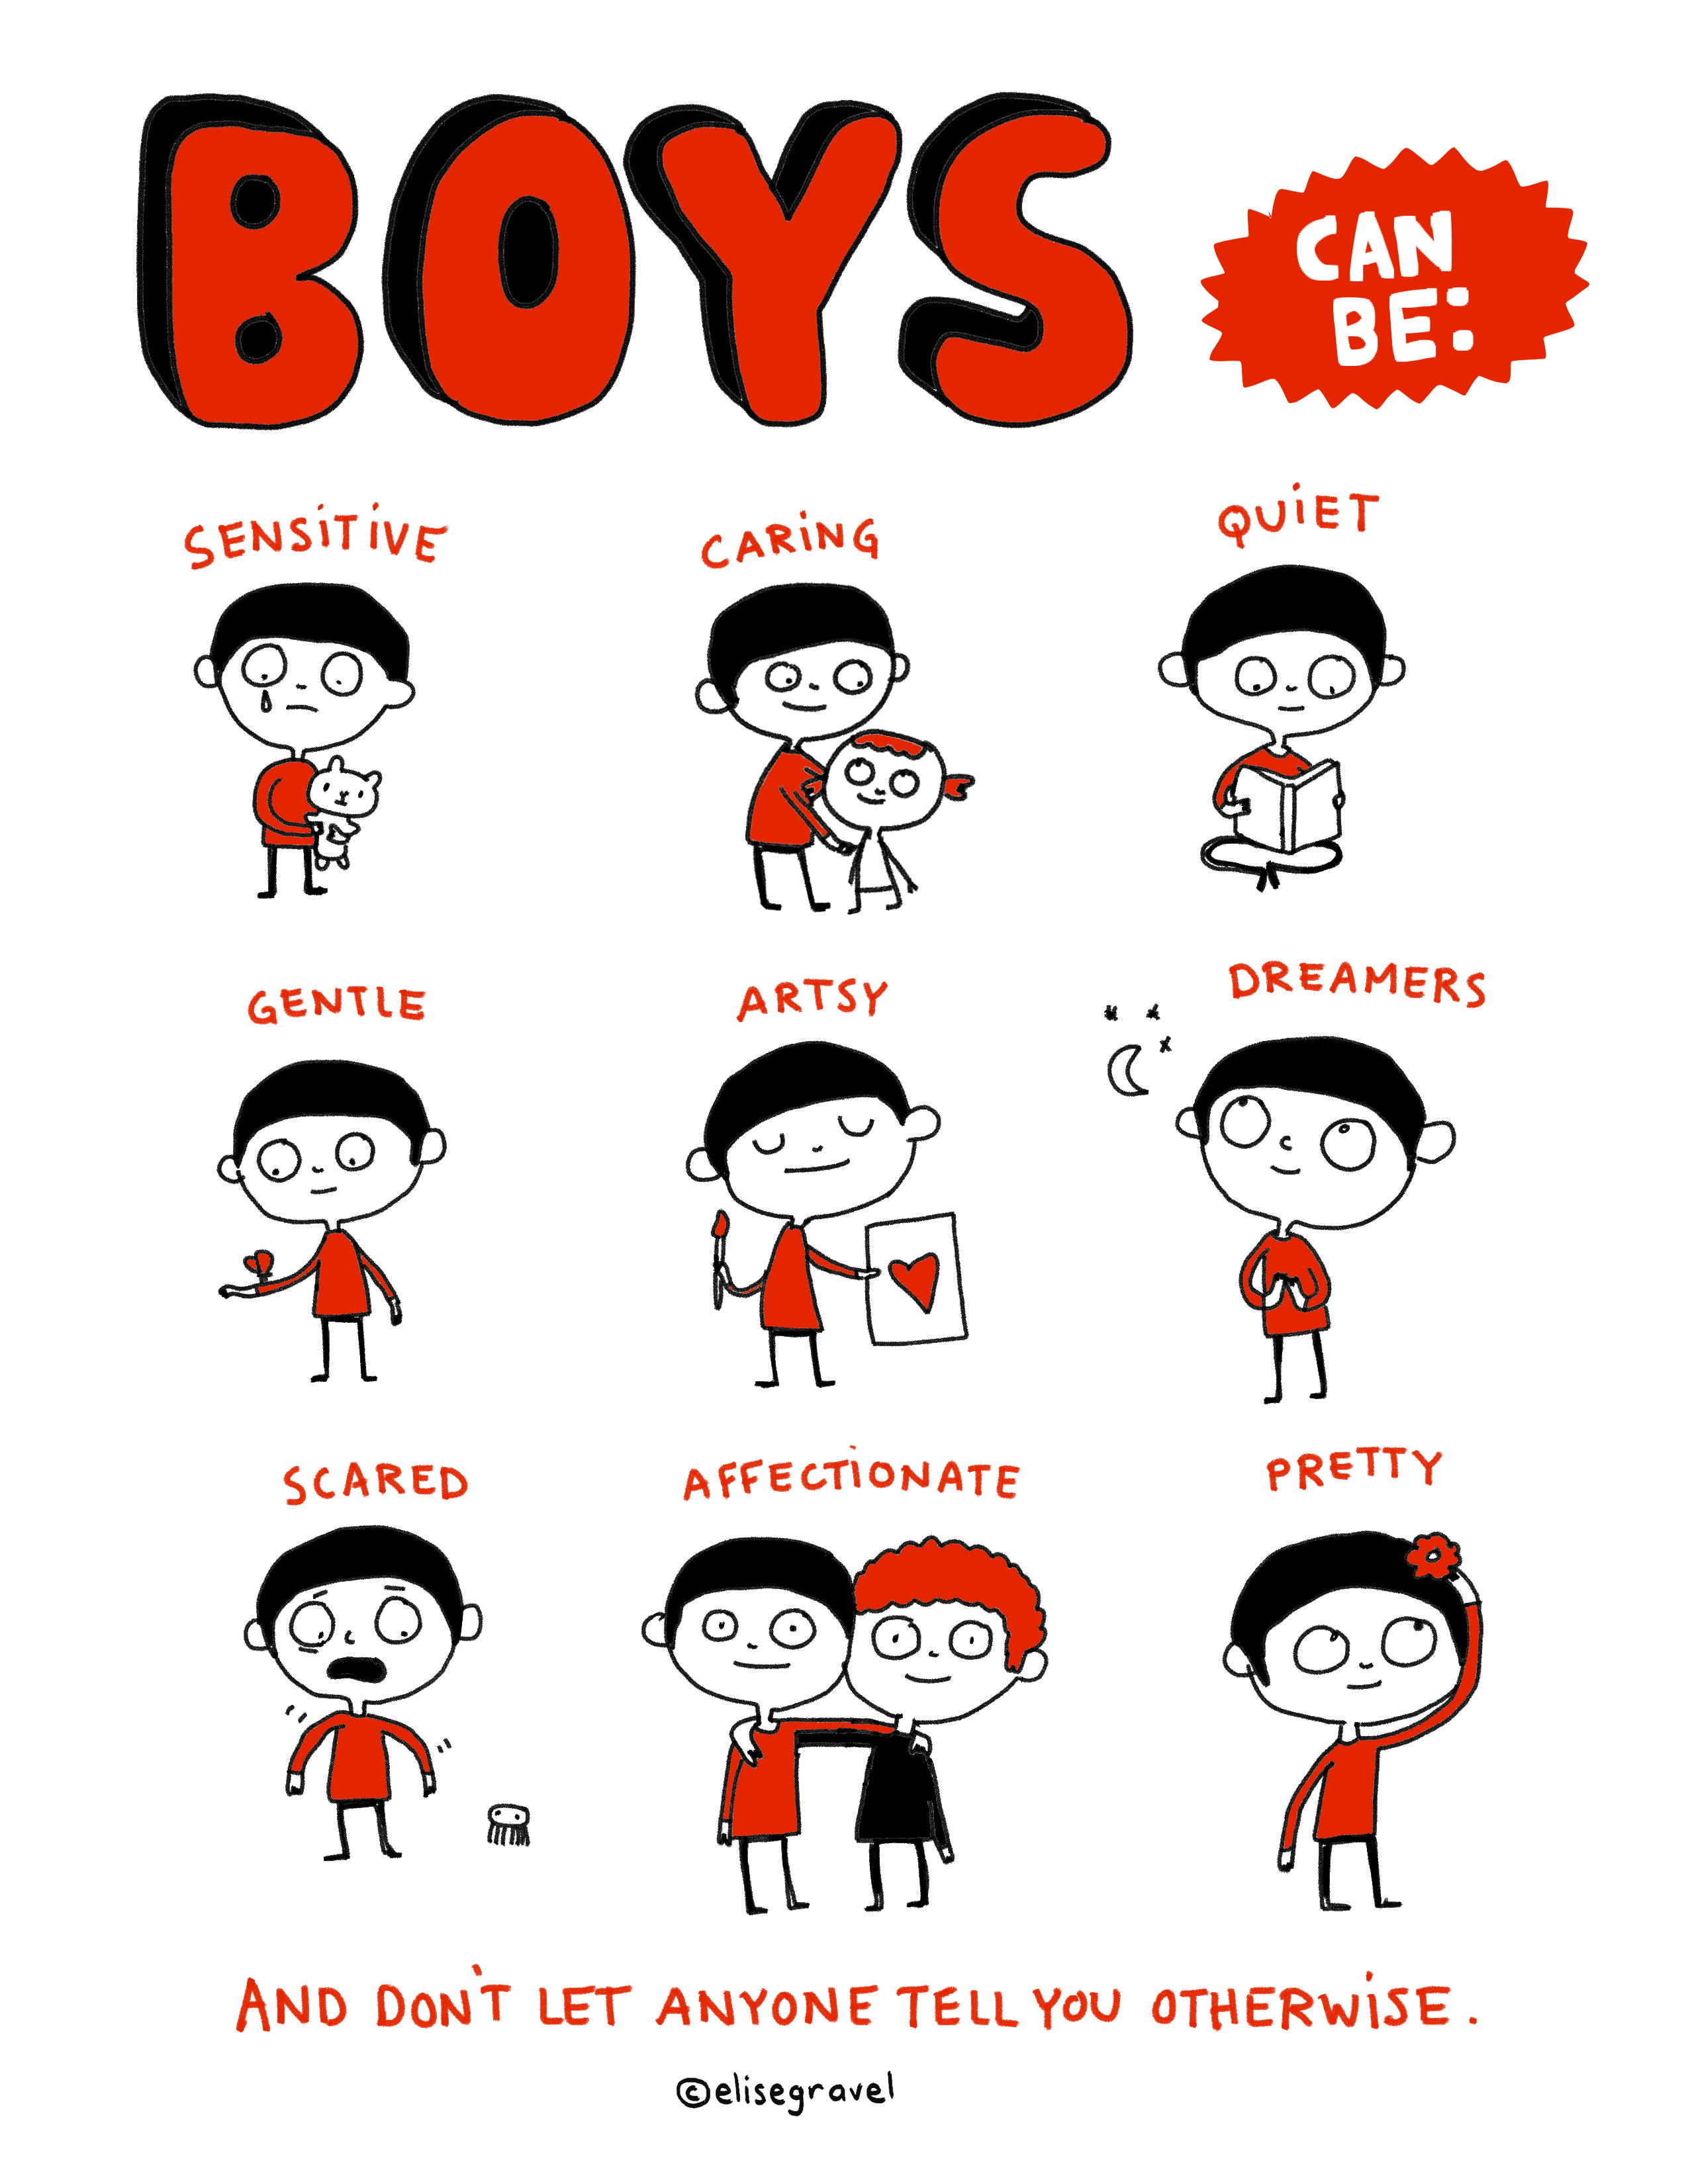 Boys can be